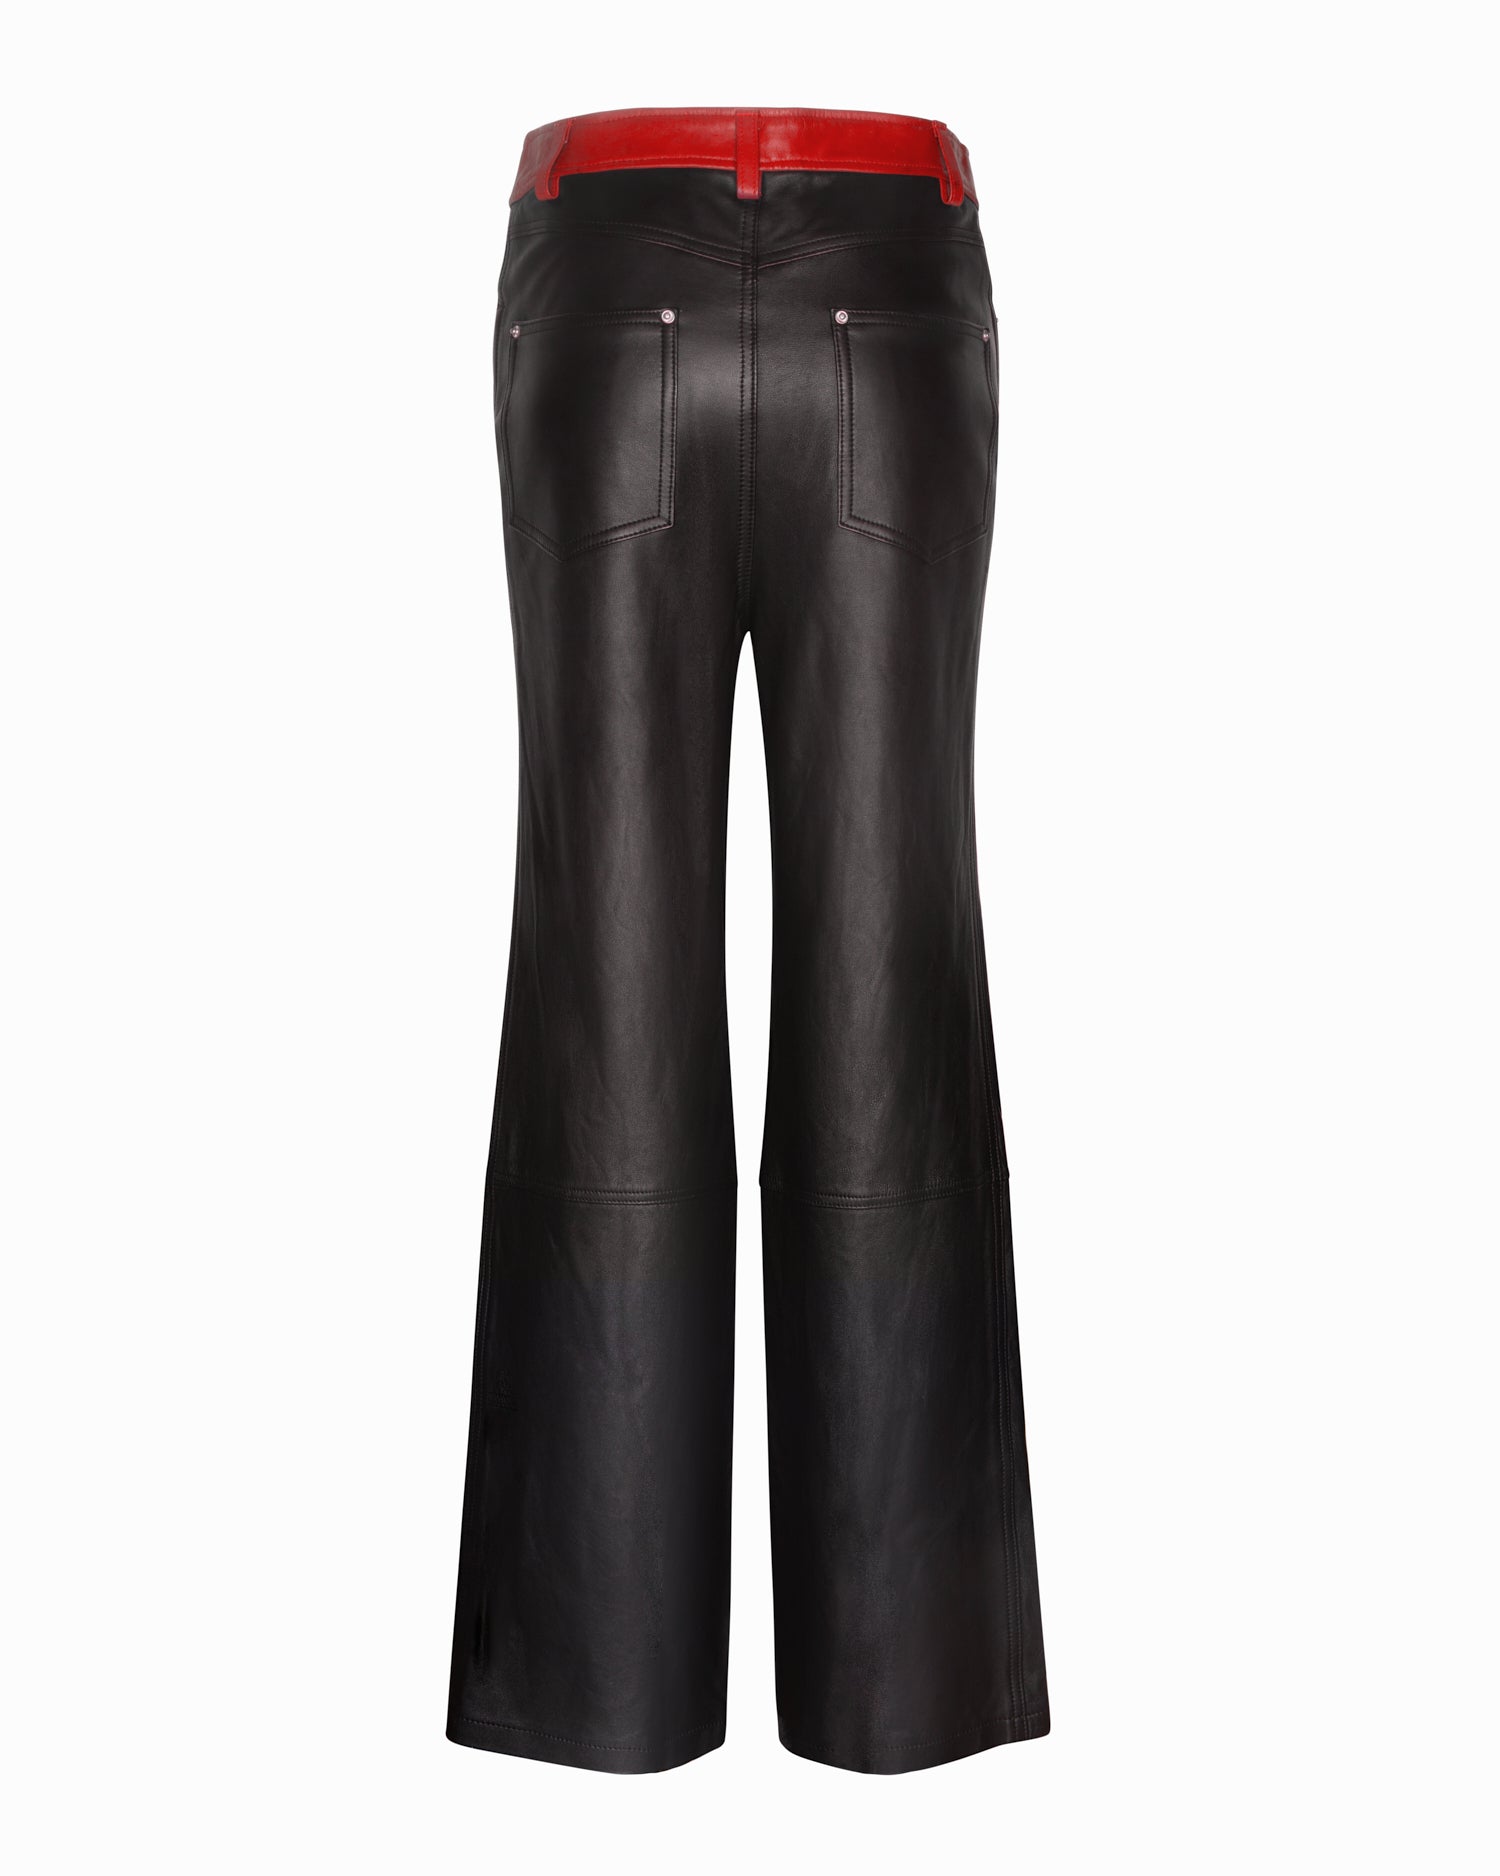 Leather trousers J Brand Black size S International in Leather